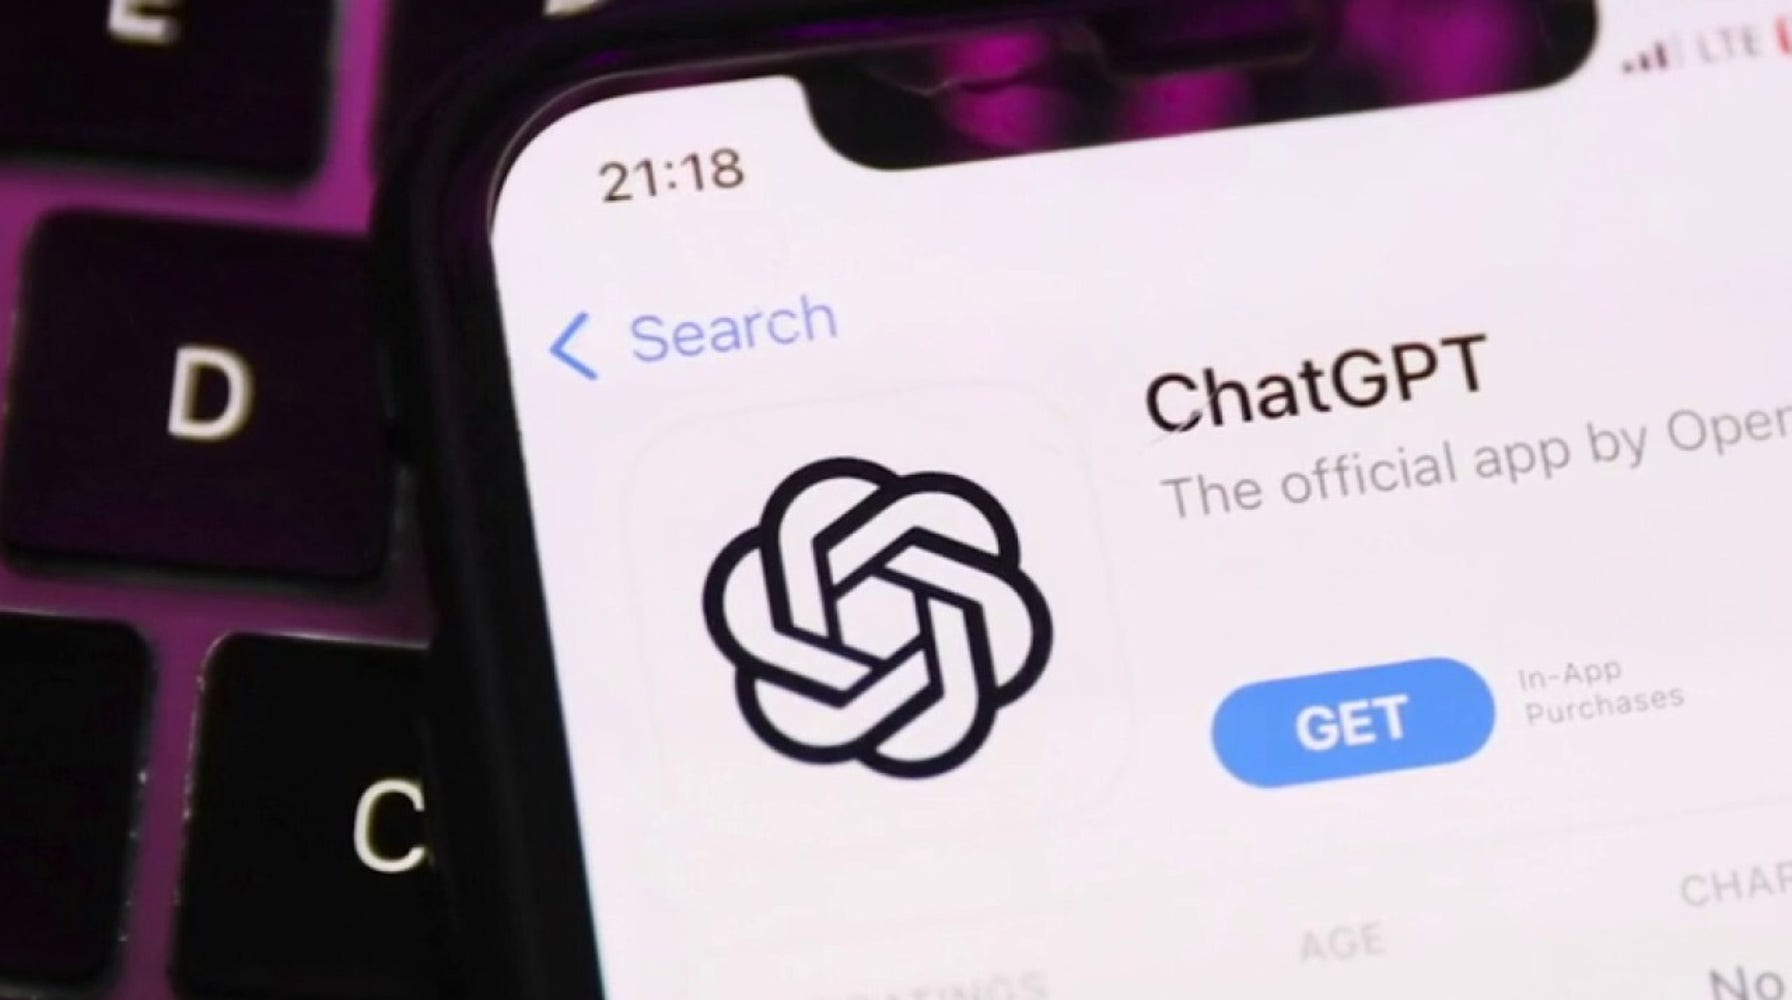 ChatGPT's Voice Revelation: Actress' Agent Claims No Imitation, OpenAI's Safety Board Disbands